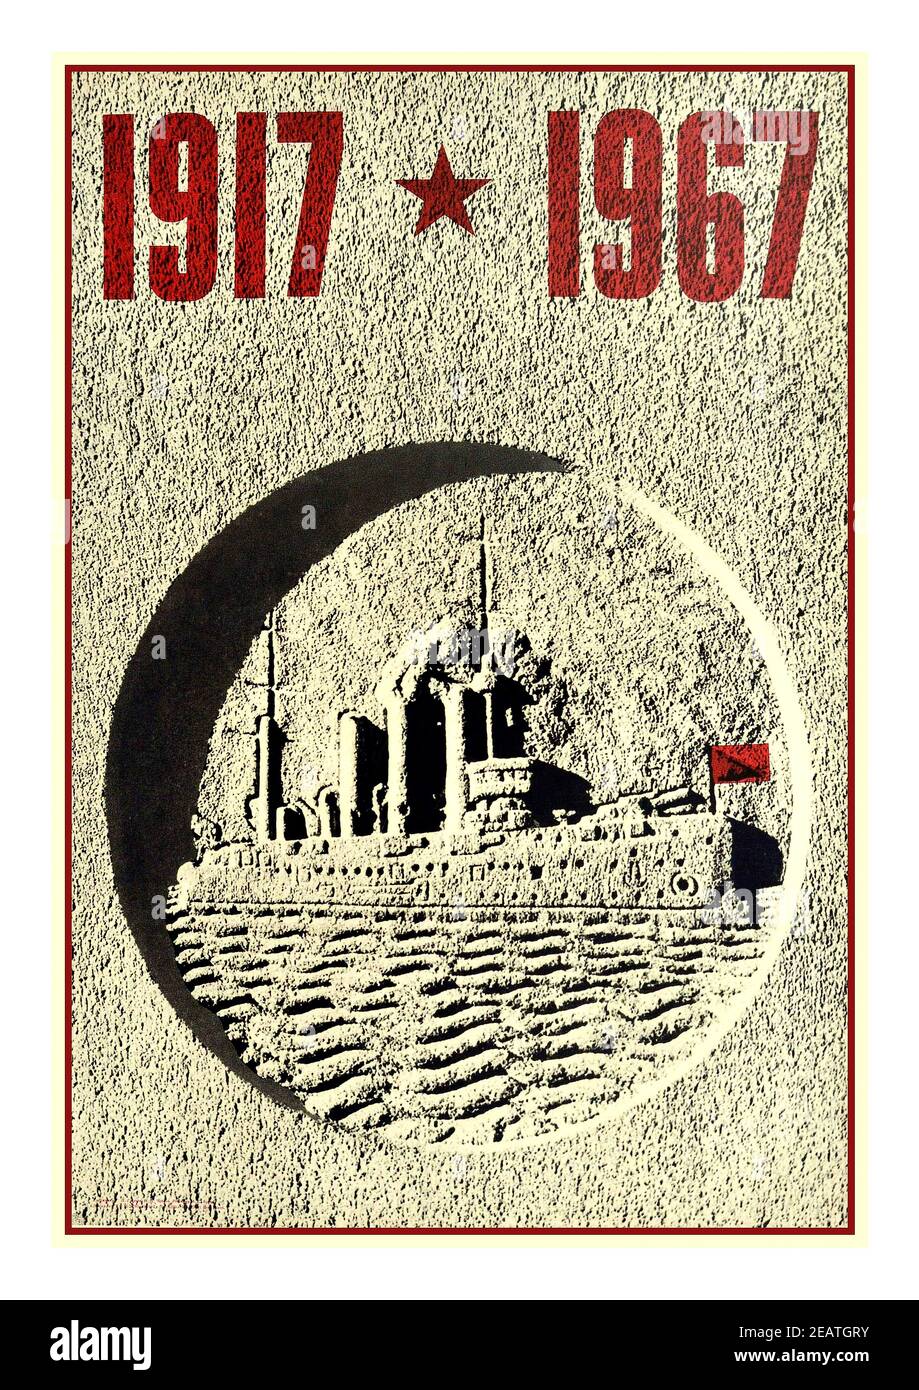 Vintage official Soviet Russian Government propaganda poster 1917-1967 celebrating the Russian Revolution and 50 years of communism in the Soviet Union - design features a stone carving of Avrora military ship with a red flag. One of the first incidents of the October Revolution in Russia took place on the cruiser Aurora, which reportedly fired the first shot, signalling the beginning of the attack on the Winter Palace. Russia, designer: G.P. Gubanov,  1967 Stock Photo